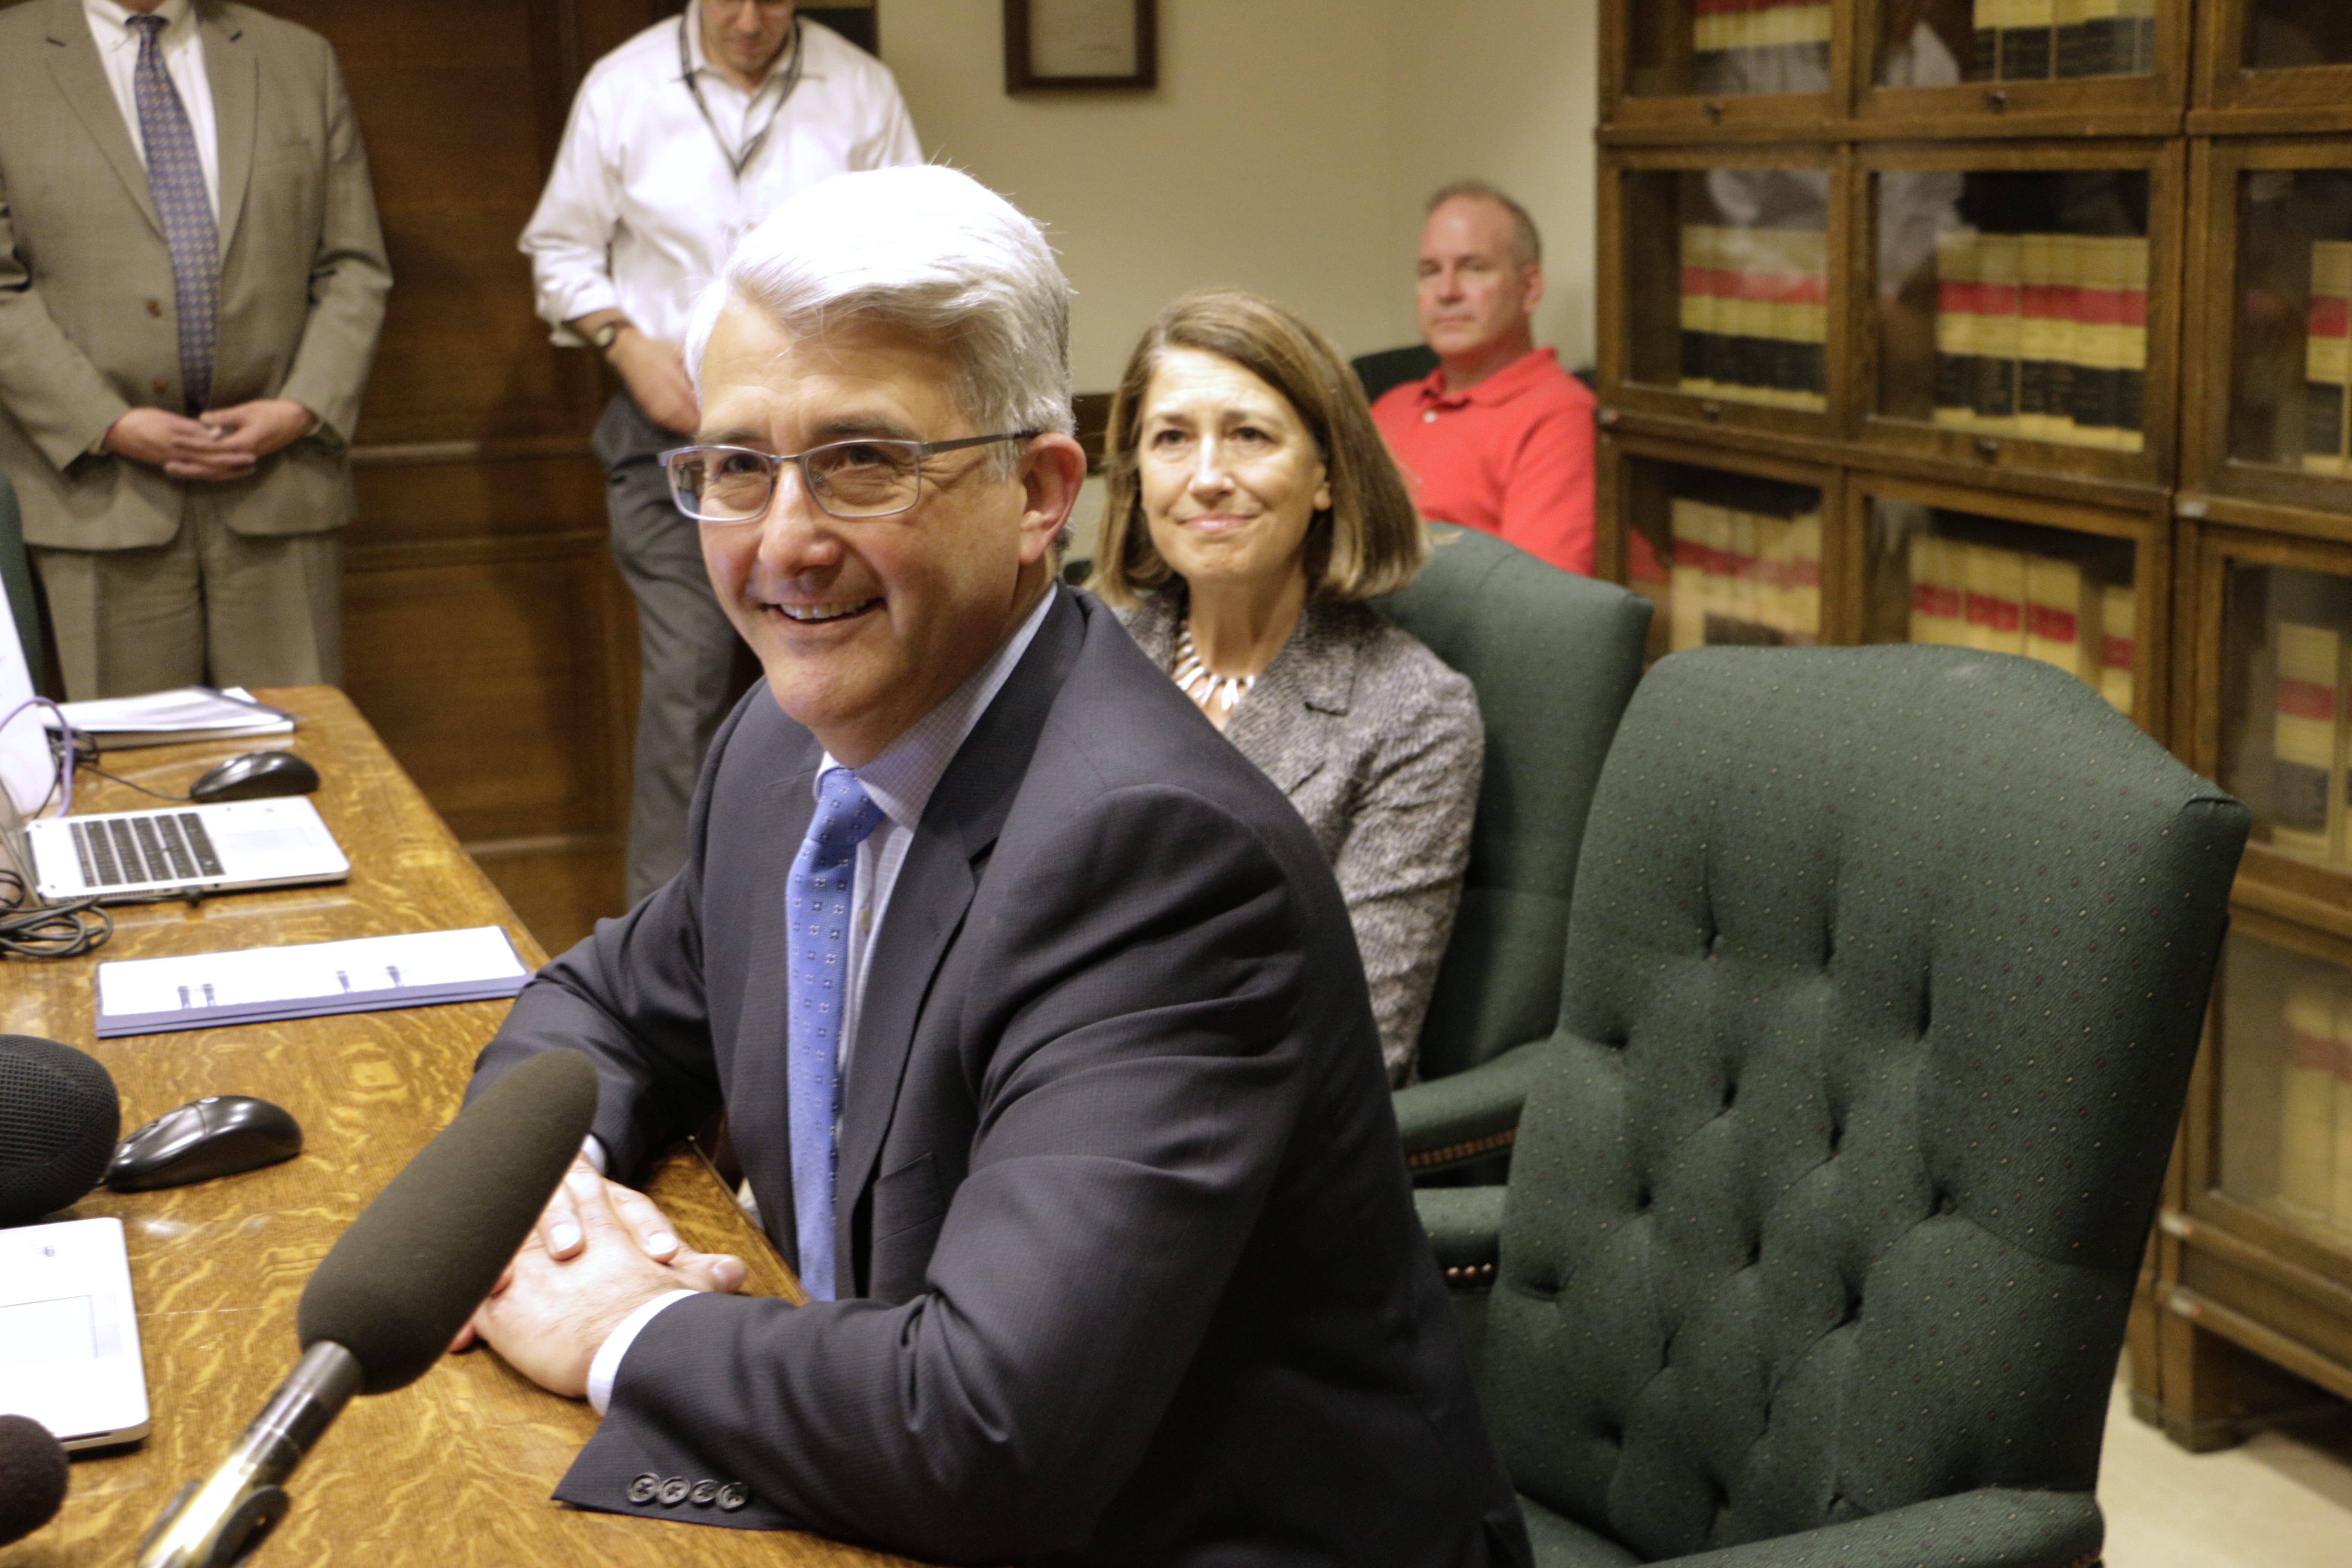 Republican Bill Bryant speaks with the media after filing to run for governor at the Capitol in Olympia, as his wife, Barbara Feasey, looks on Thursday. Bryant is challenging incumbent Democratic Gov. Jay Inslee.